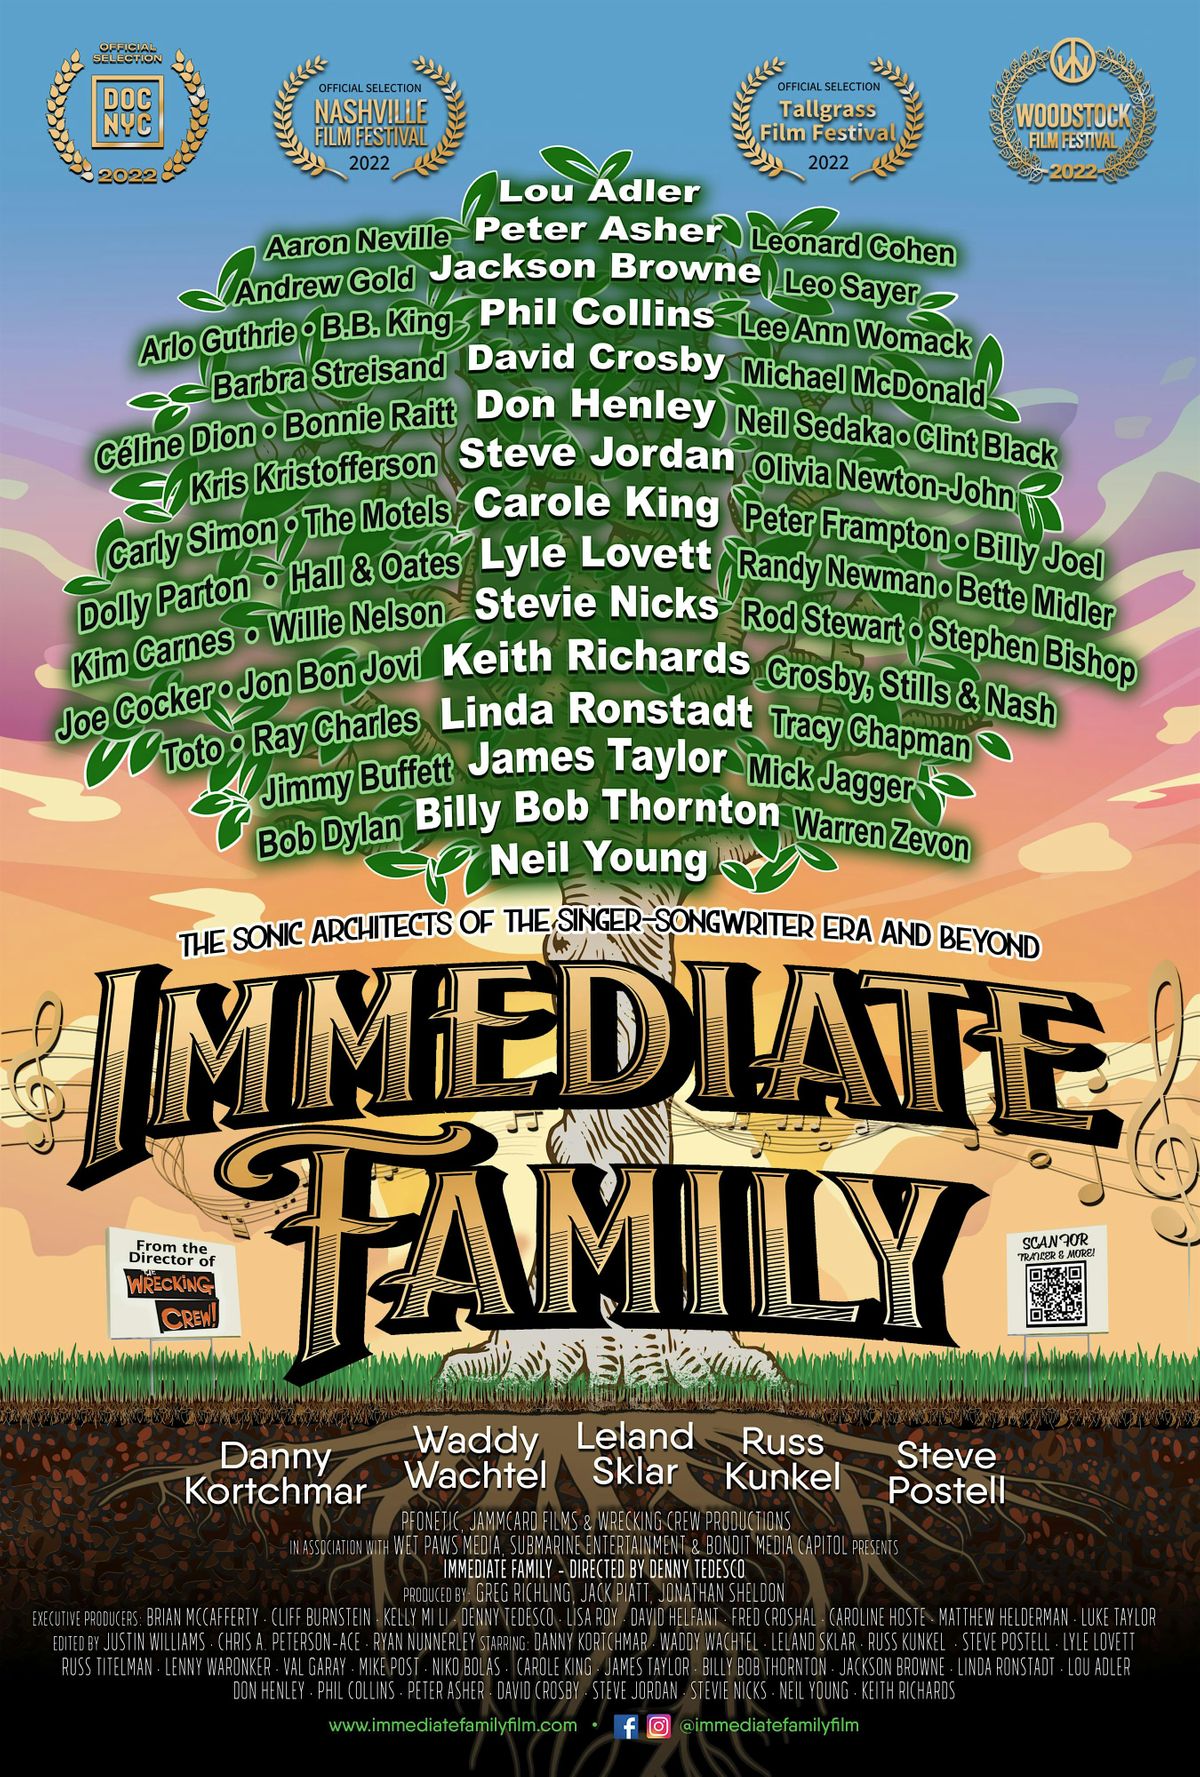 Me, Myself, & Us Productions: "Immediate Family" Documentary \/ Q&A